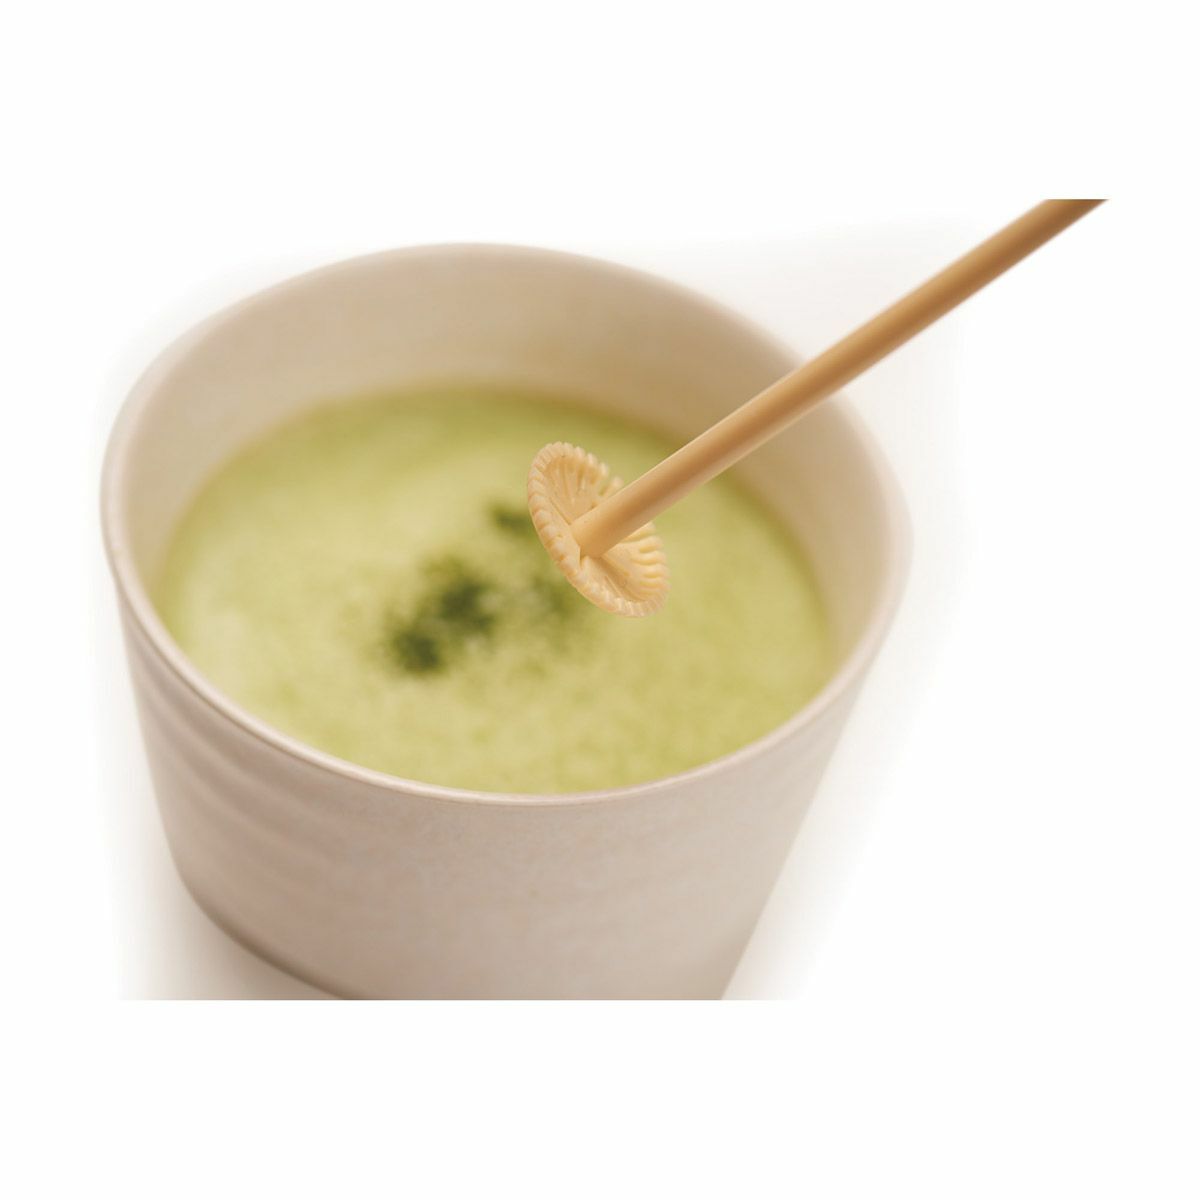 Matcha Frother - Battery Operated